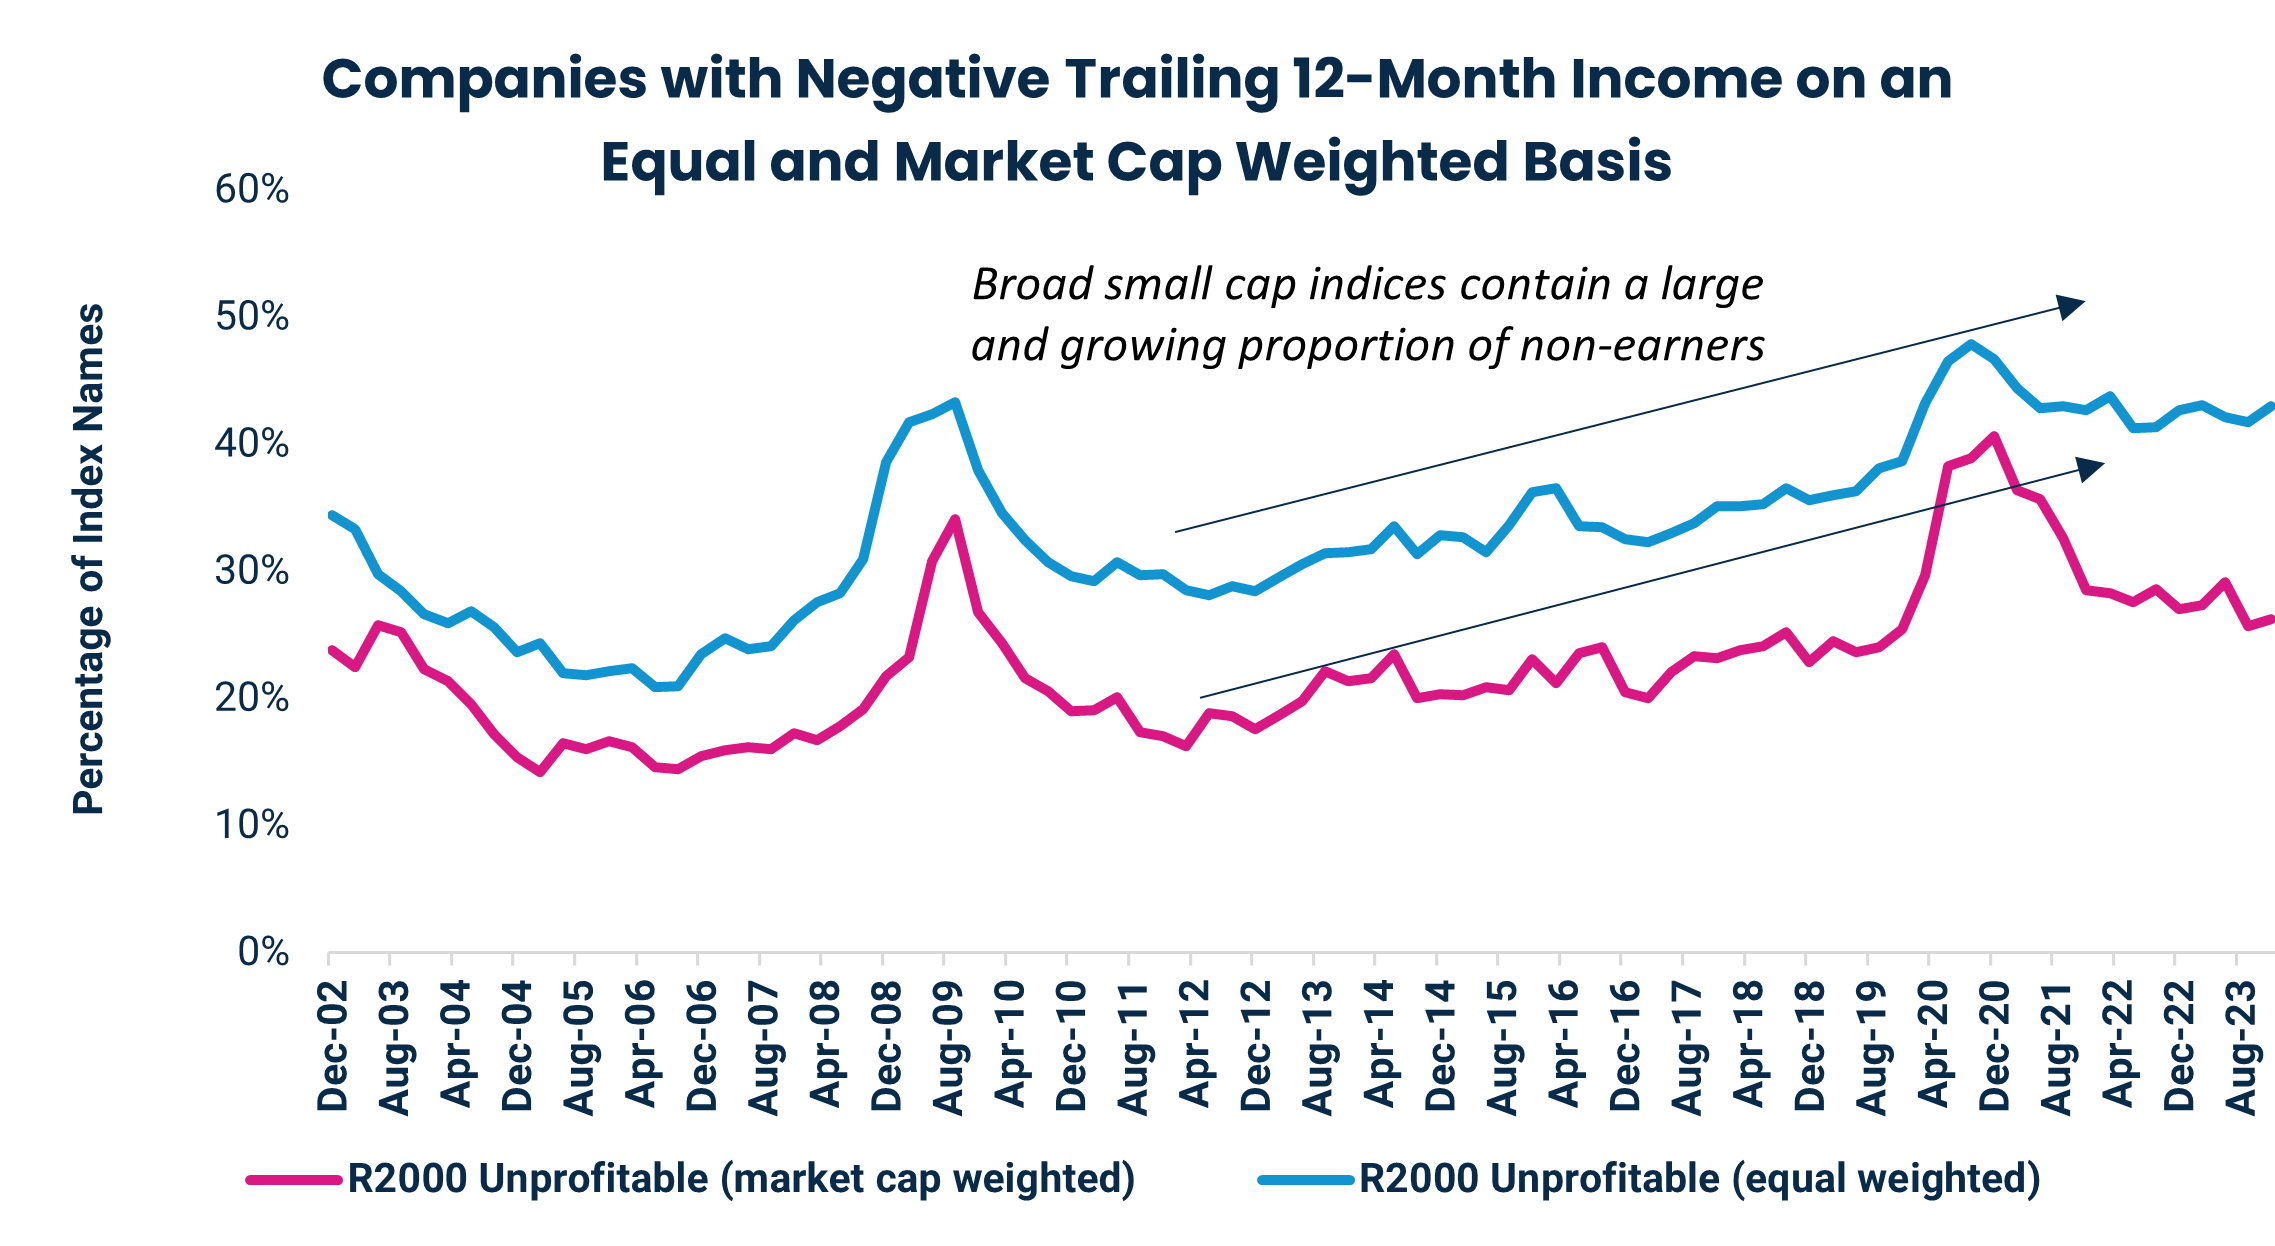 Companies with Negative Trailing 12-Month Income on an Equal and Market Cap Weighted Basis